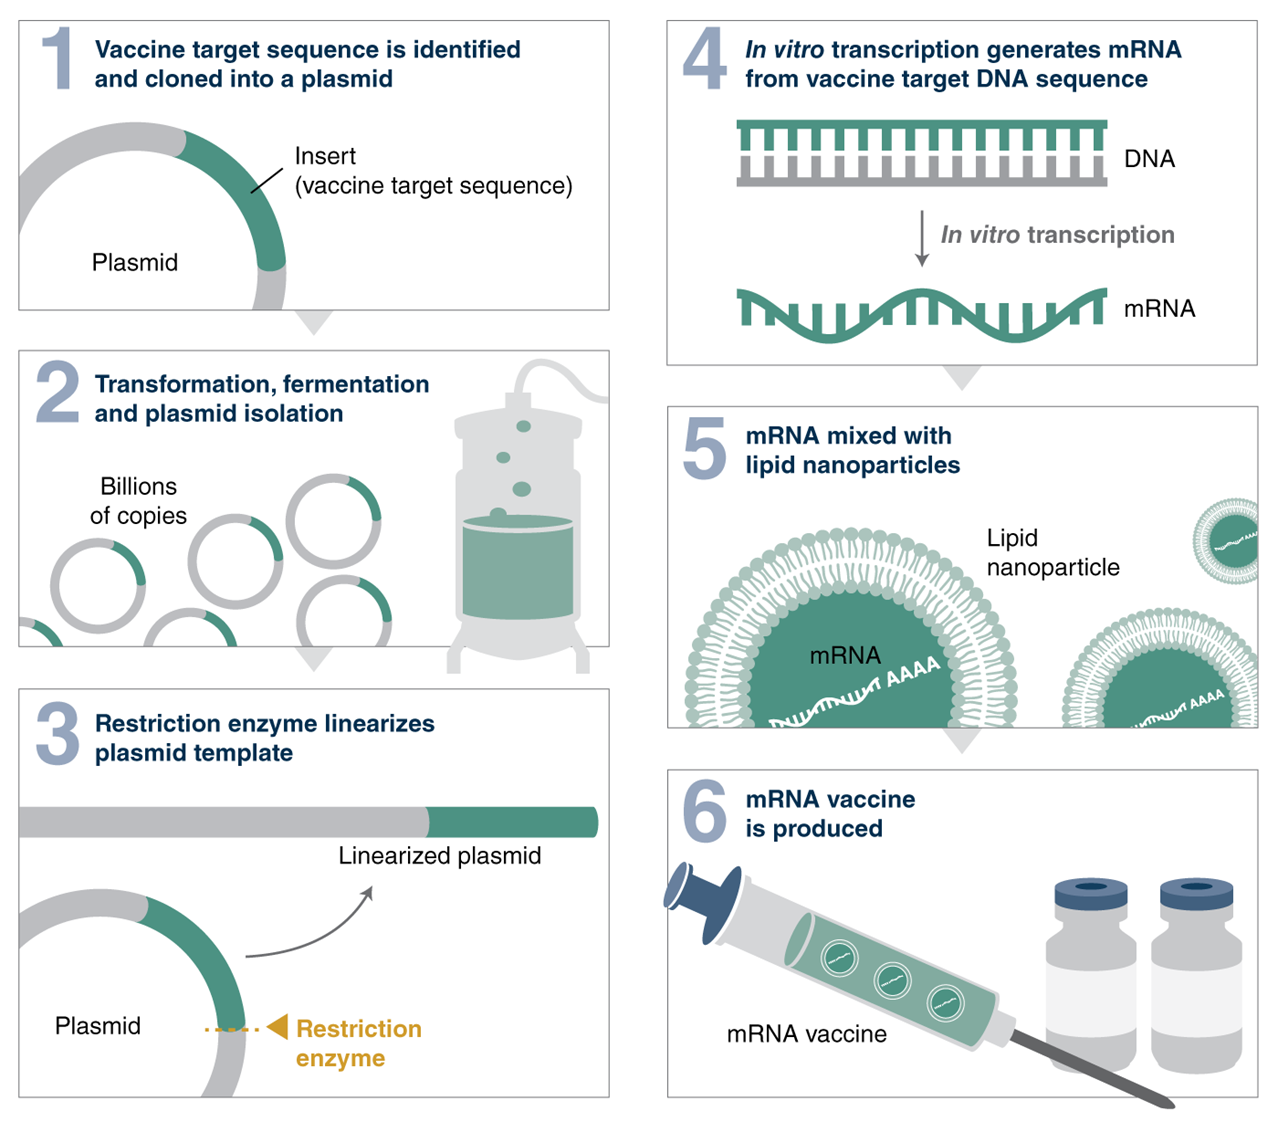 Looking into China’s mRNA Vaccine Industry: A Latecomer’s Prospects